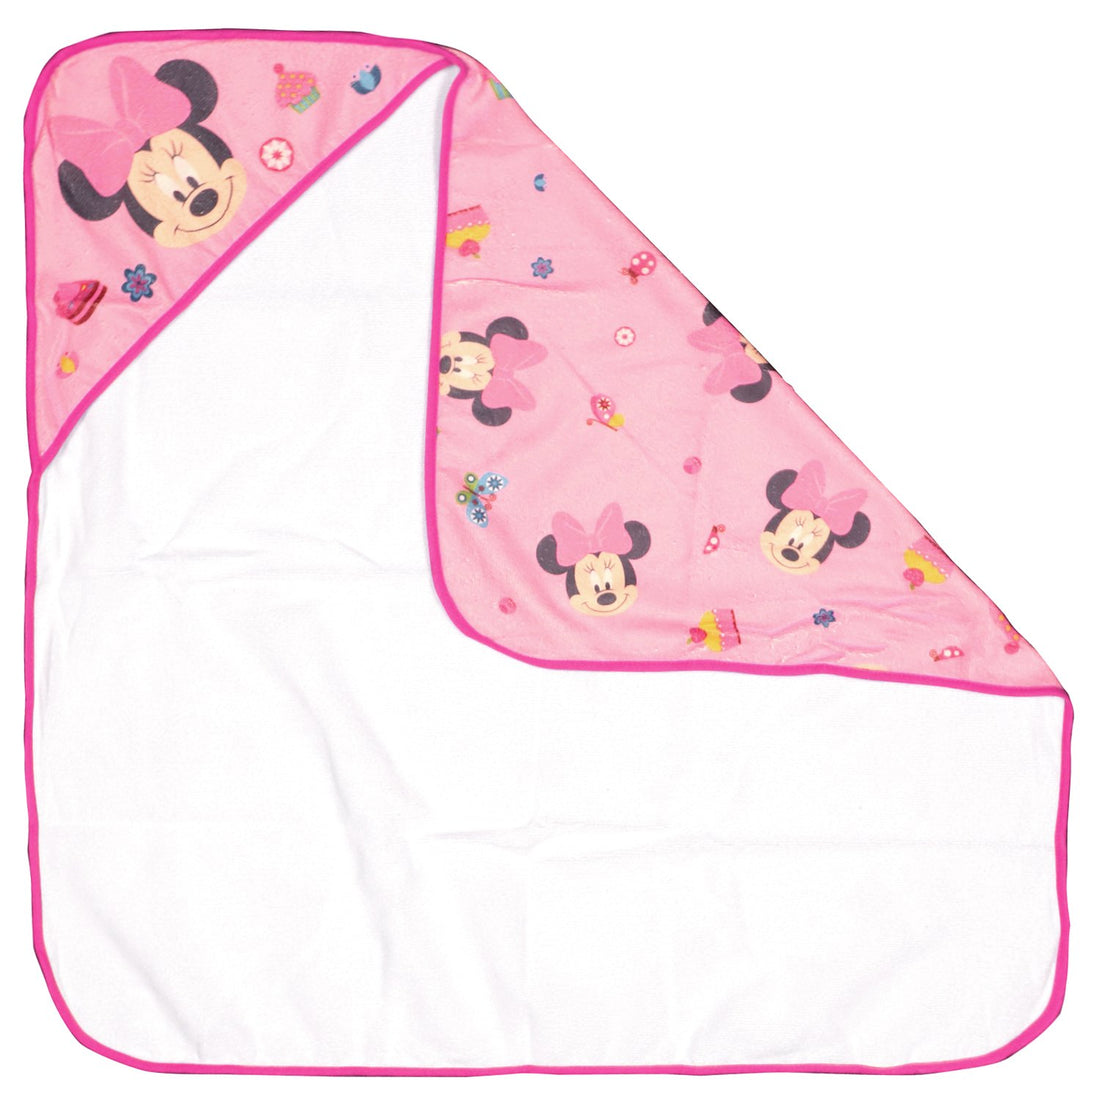 Trendy Apparel Shop Girl's Minnie Mouse Square Hooded Towel